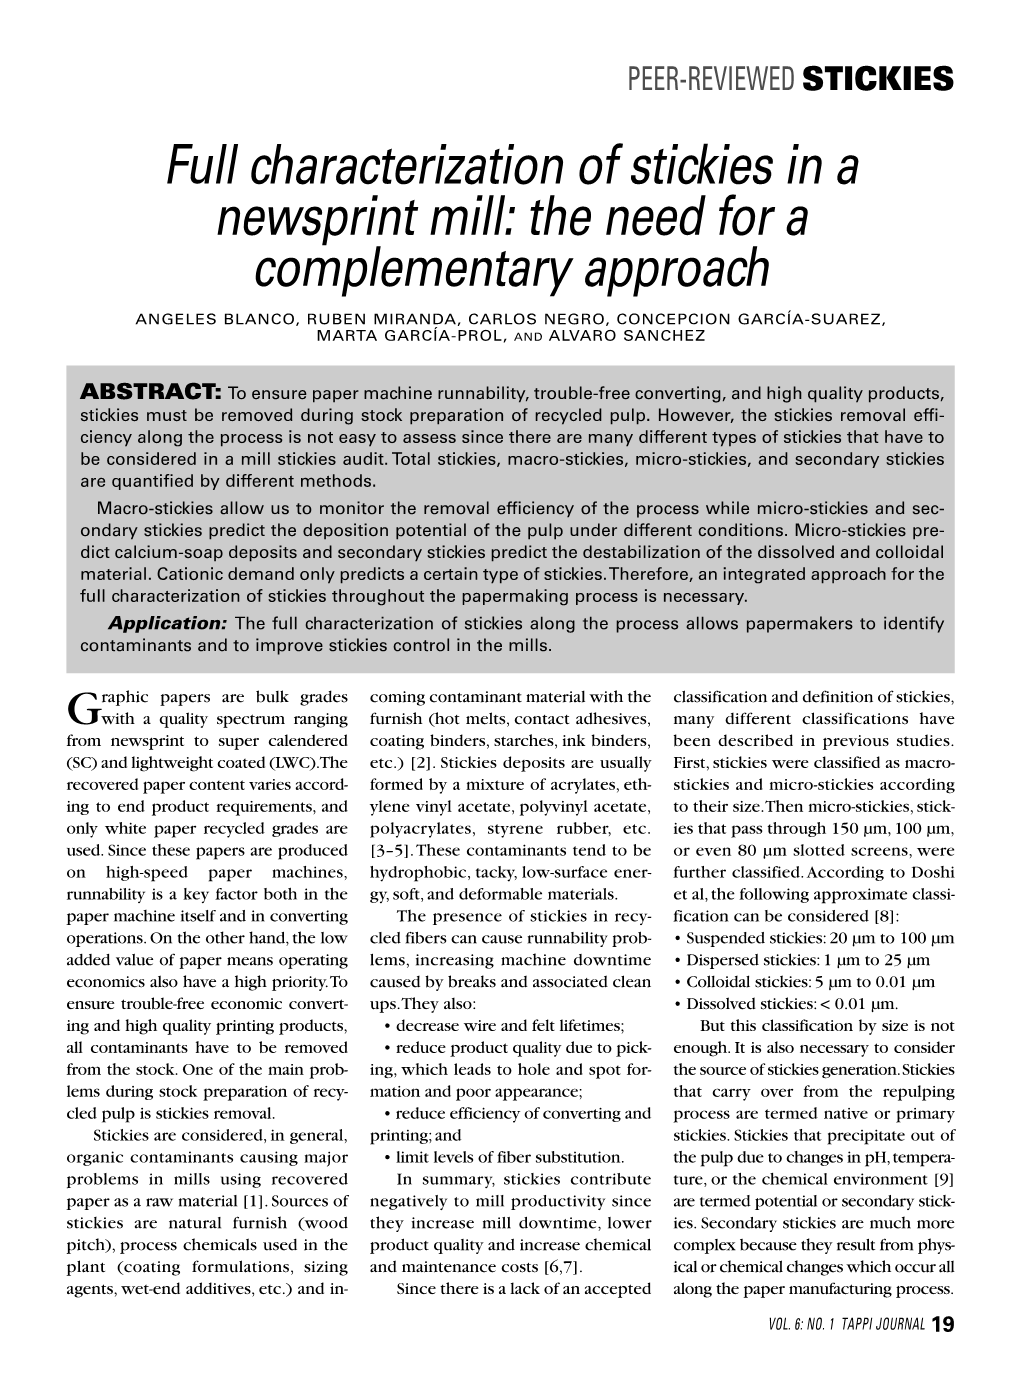 Full Characterization of Stickies in a Newsprint Mill: the Need for a Complementary Approach